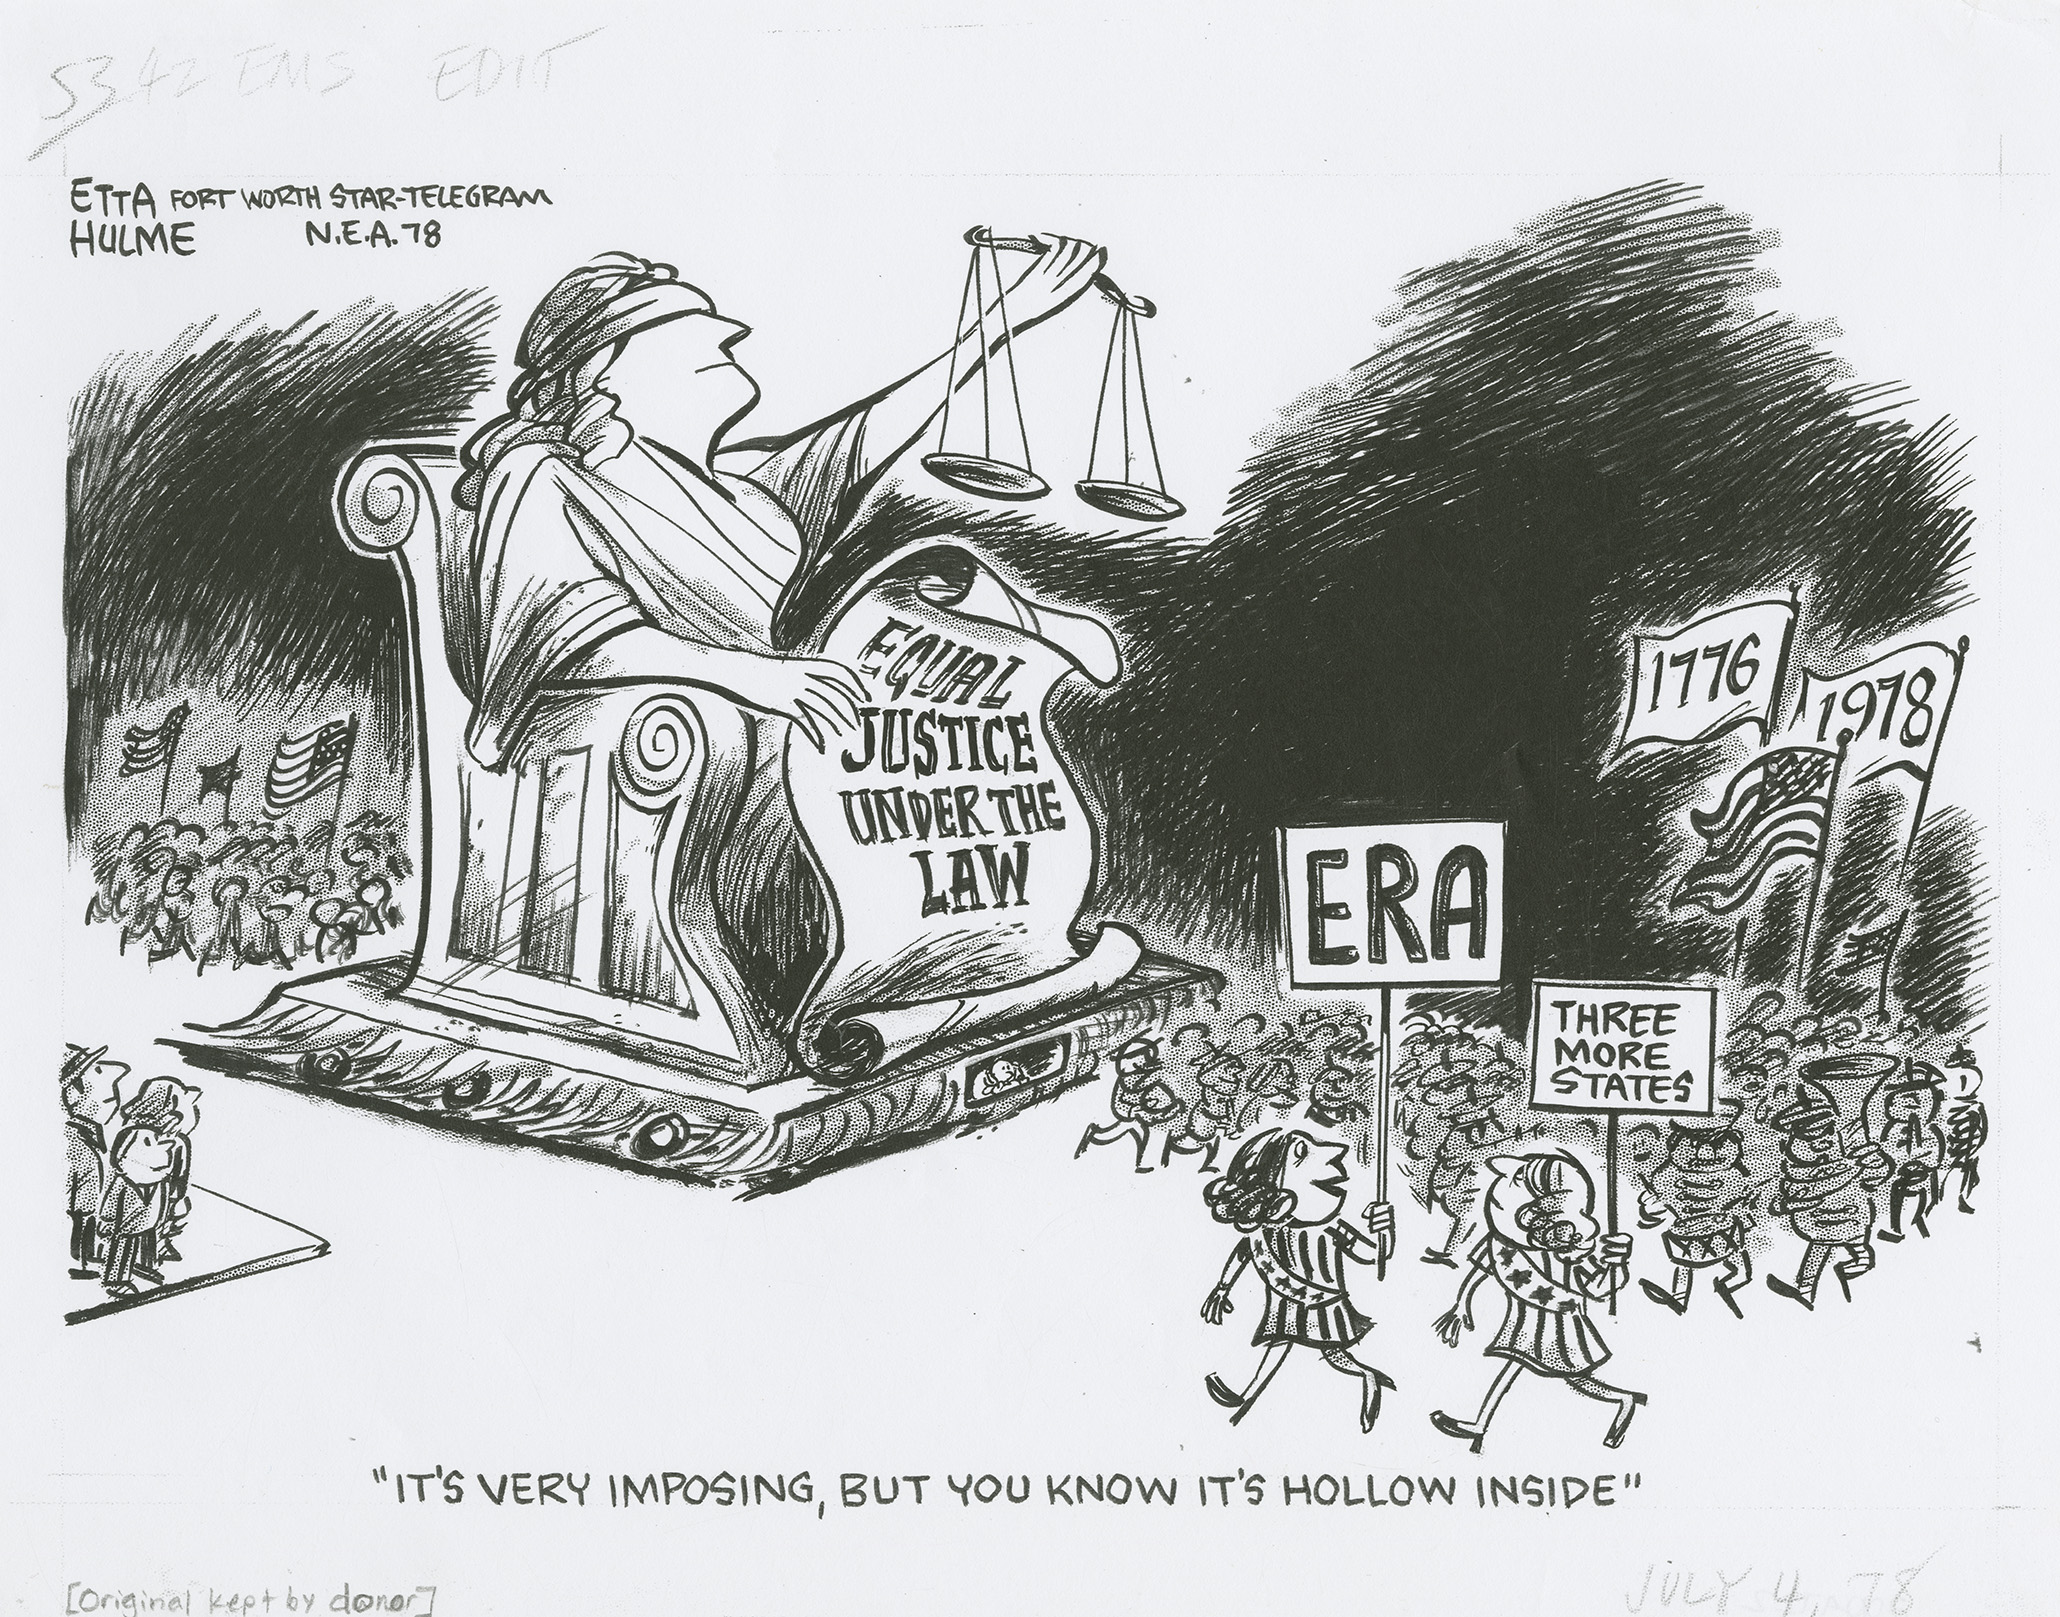 Editorial cartoon by Etta Hulme (1978) depicting a Lady Justice statue holding a scroll that reads, “Equal Justice Under the Law,” while pro-Equal Rights Amendment (ERA) women are commenting, “It’s very imposing, but you know it’s hollow inside”